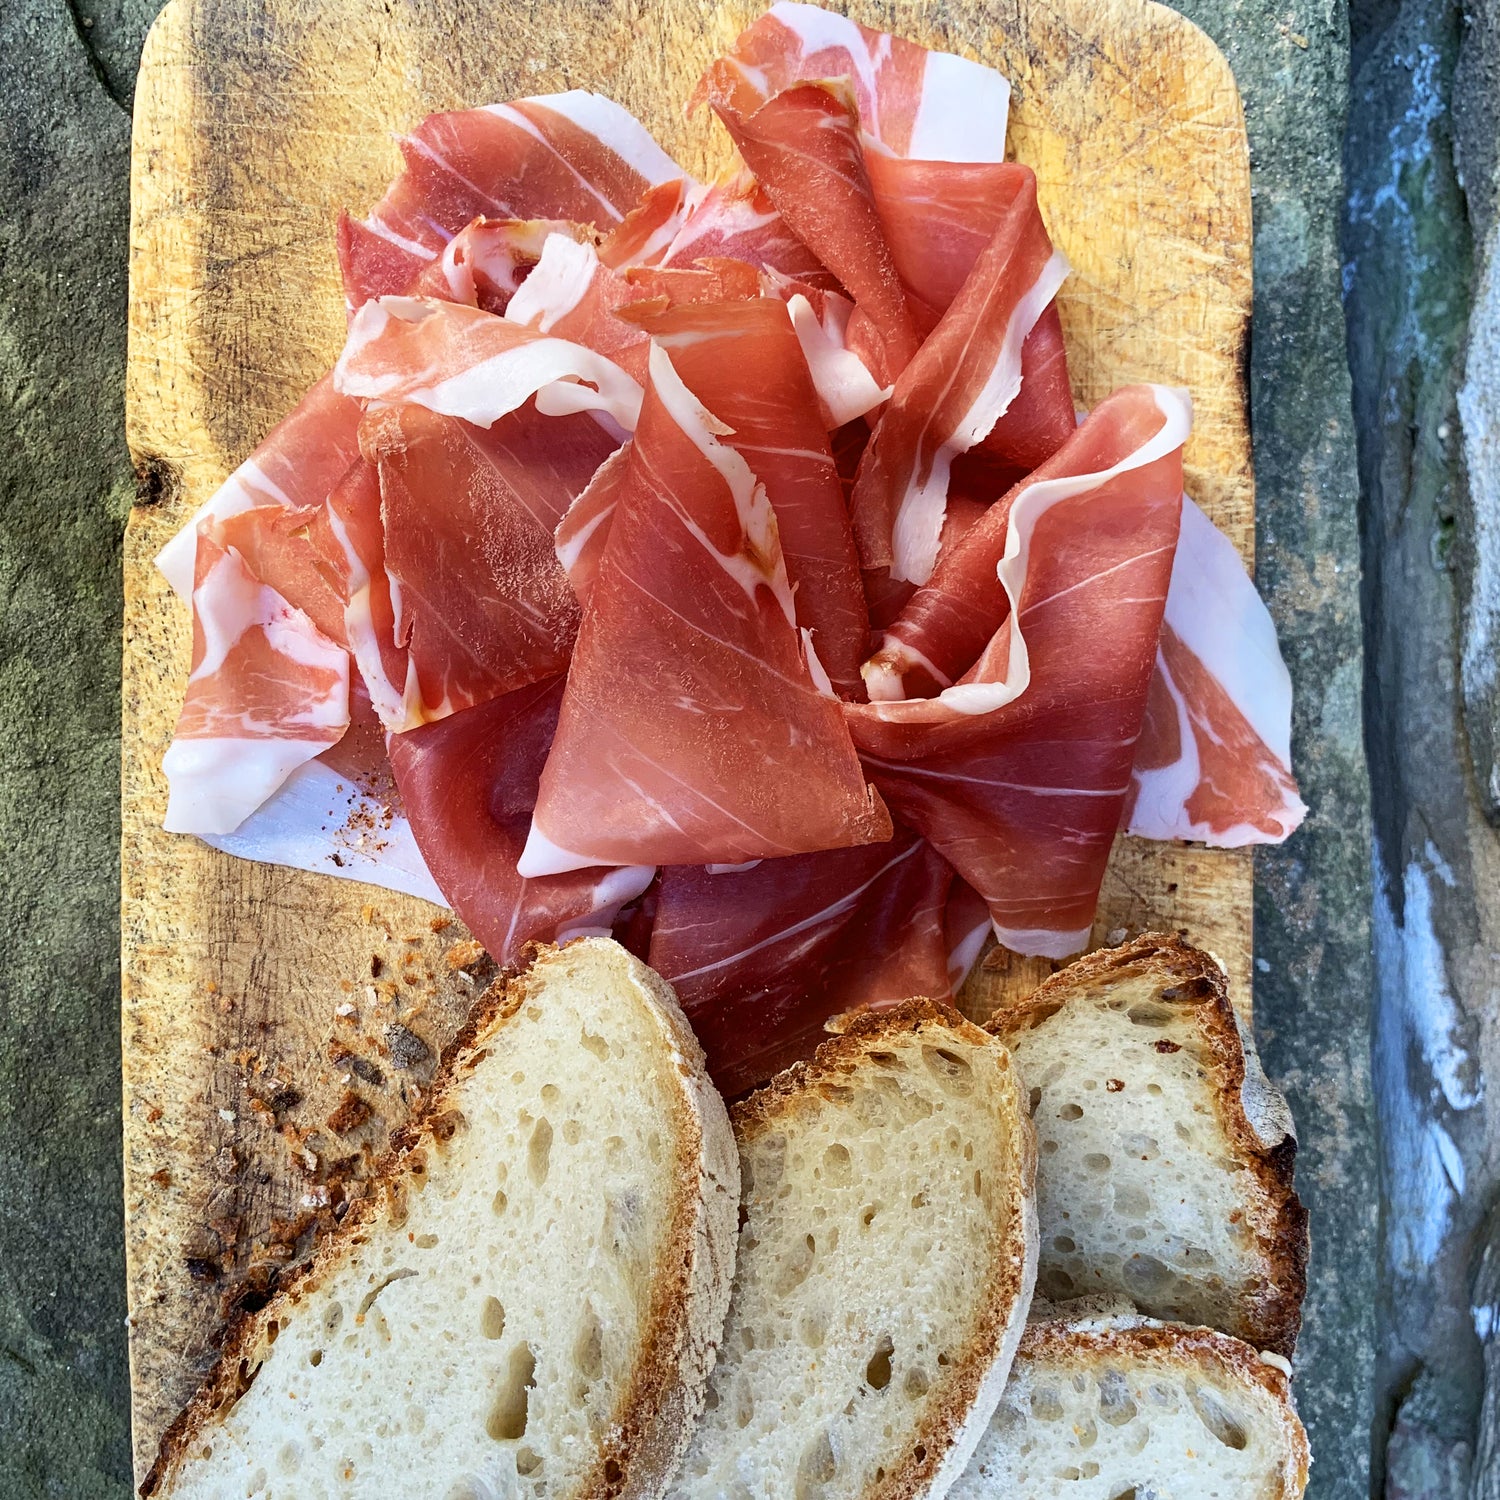 Tuscan Cured Meats